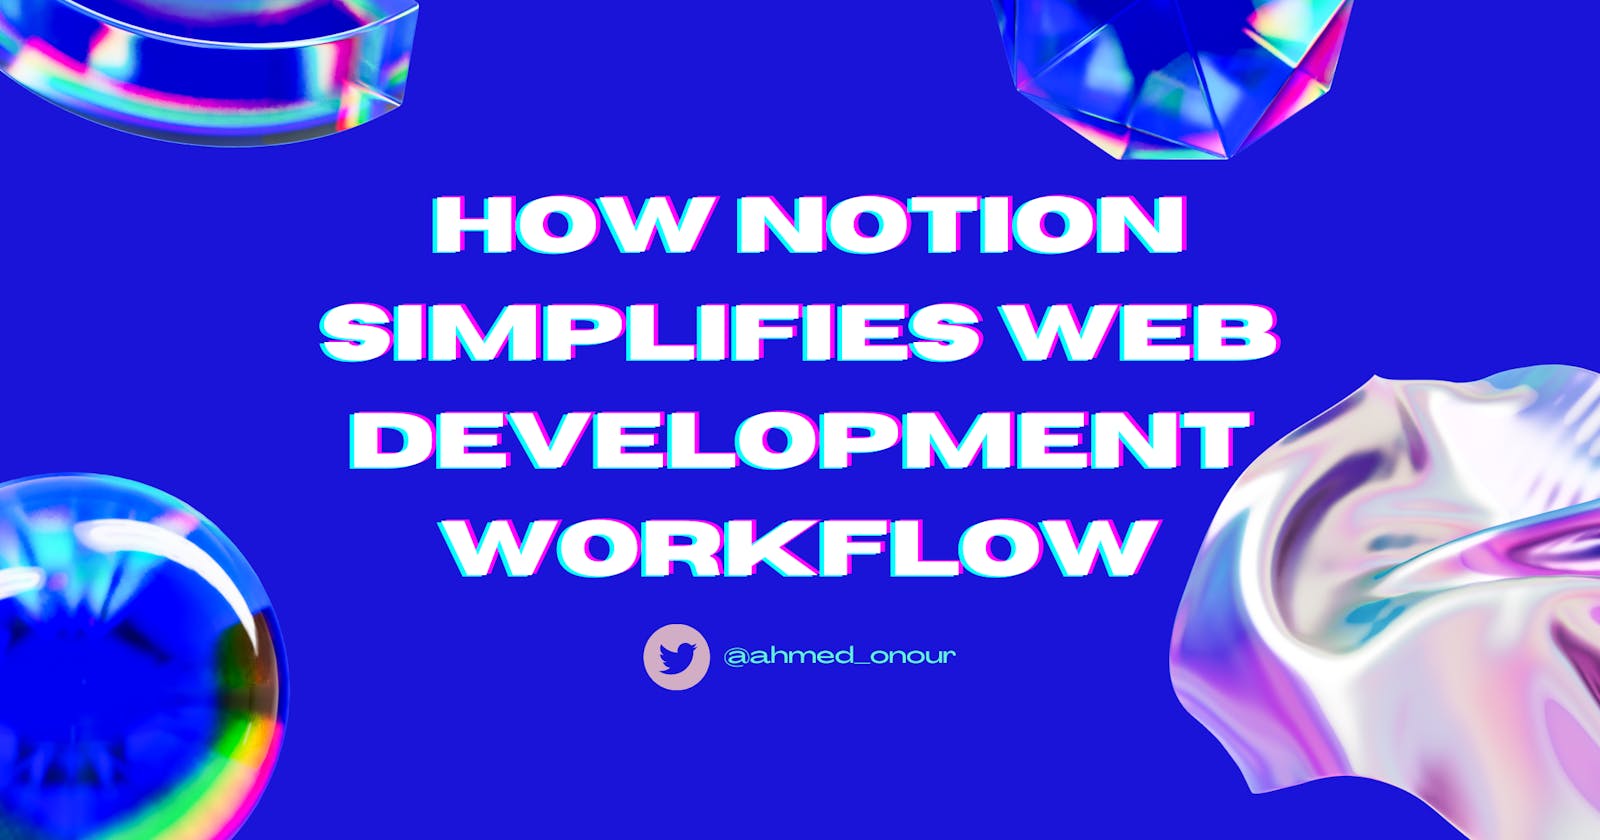 From Chaos to Clarity: How Notion Simplifies Web Development Workflow